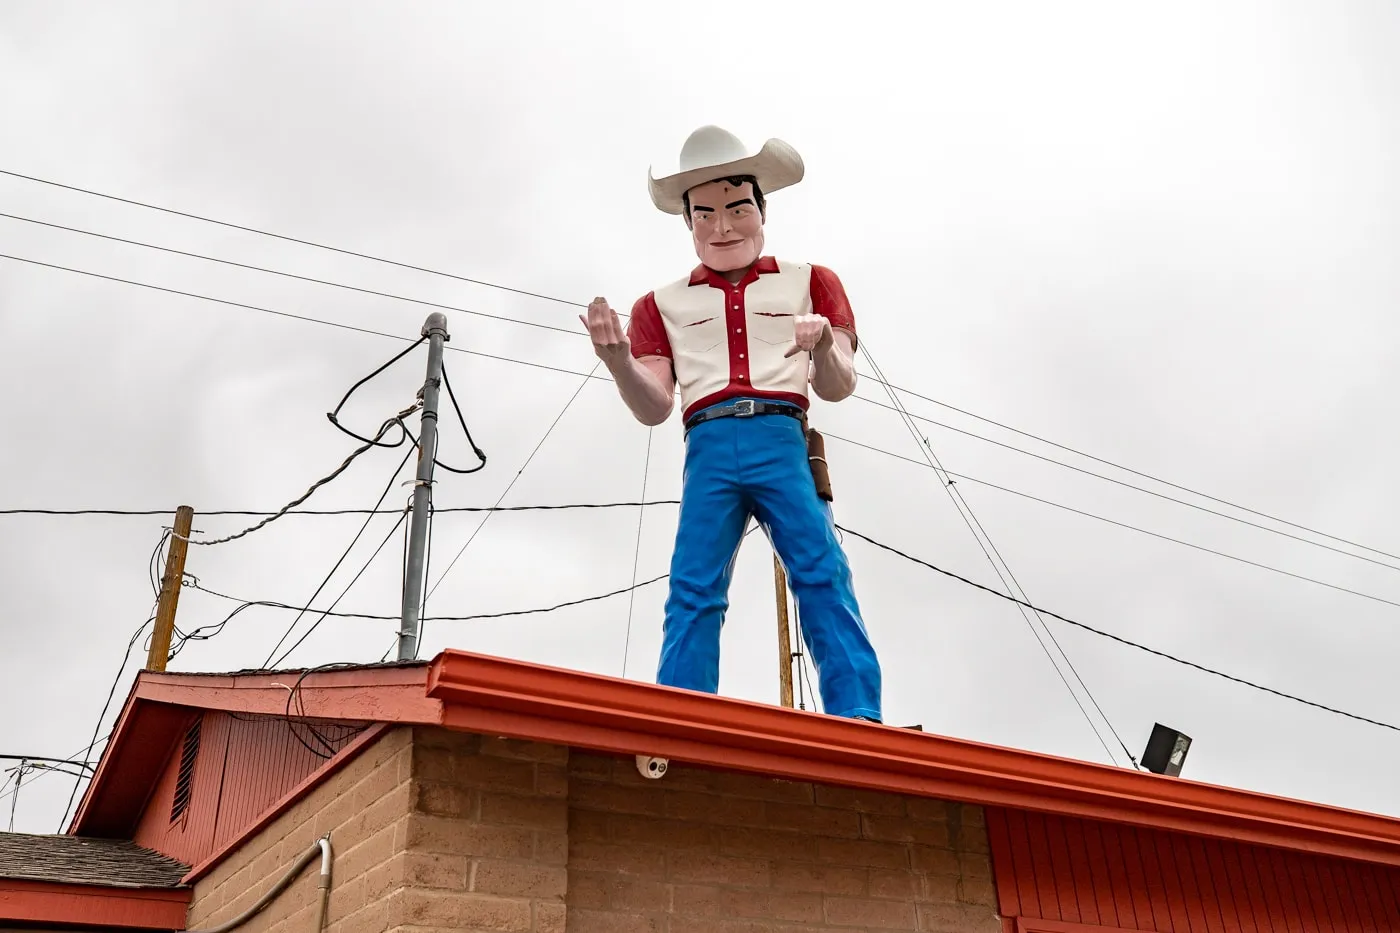 Dude Man - Cowboy Muffler Man in Gallup, New Mexico Route 66 Roadside Attraction